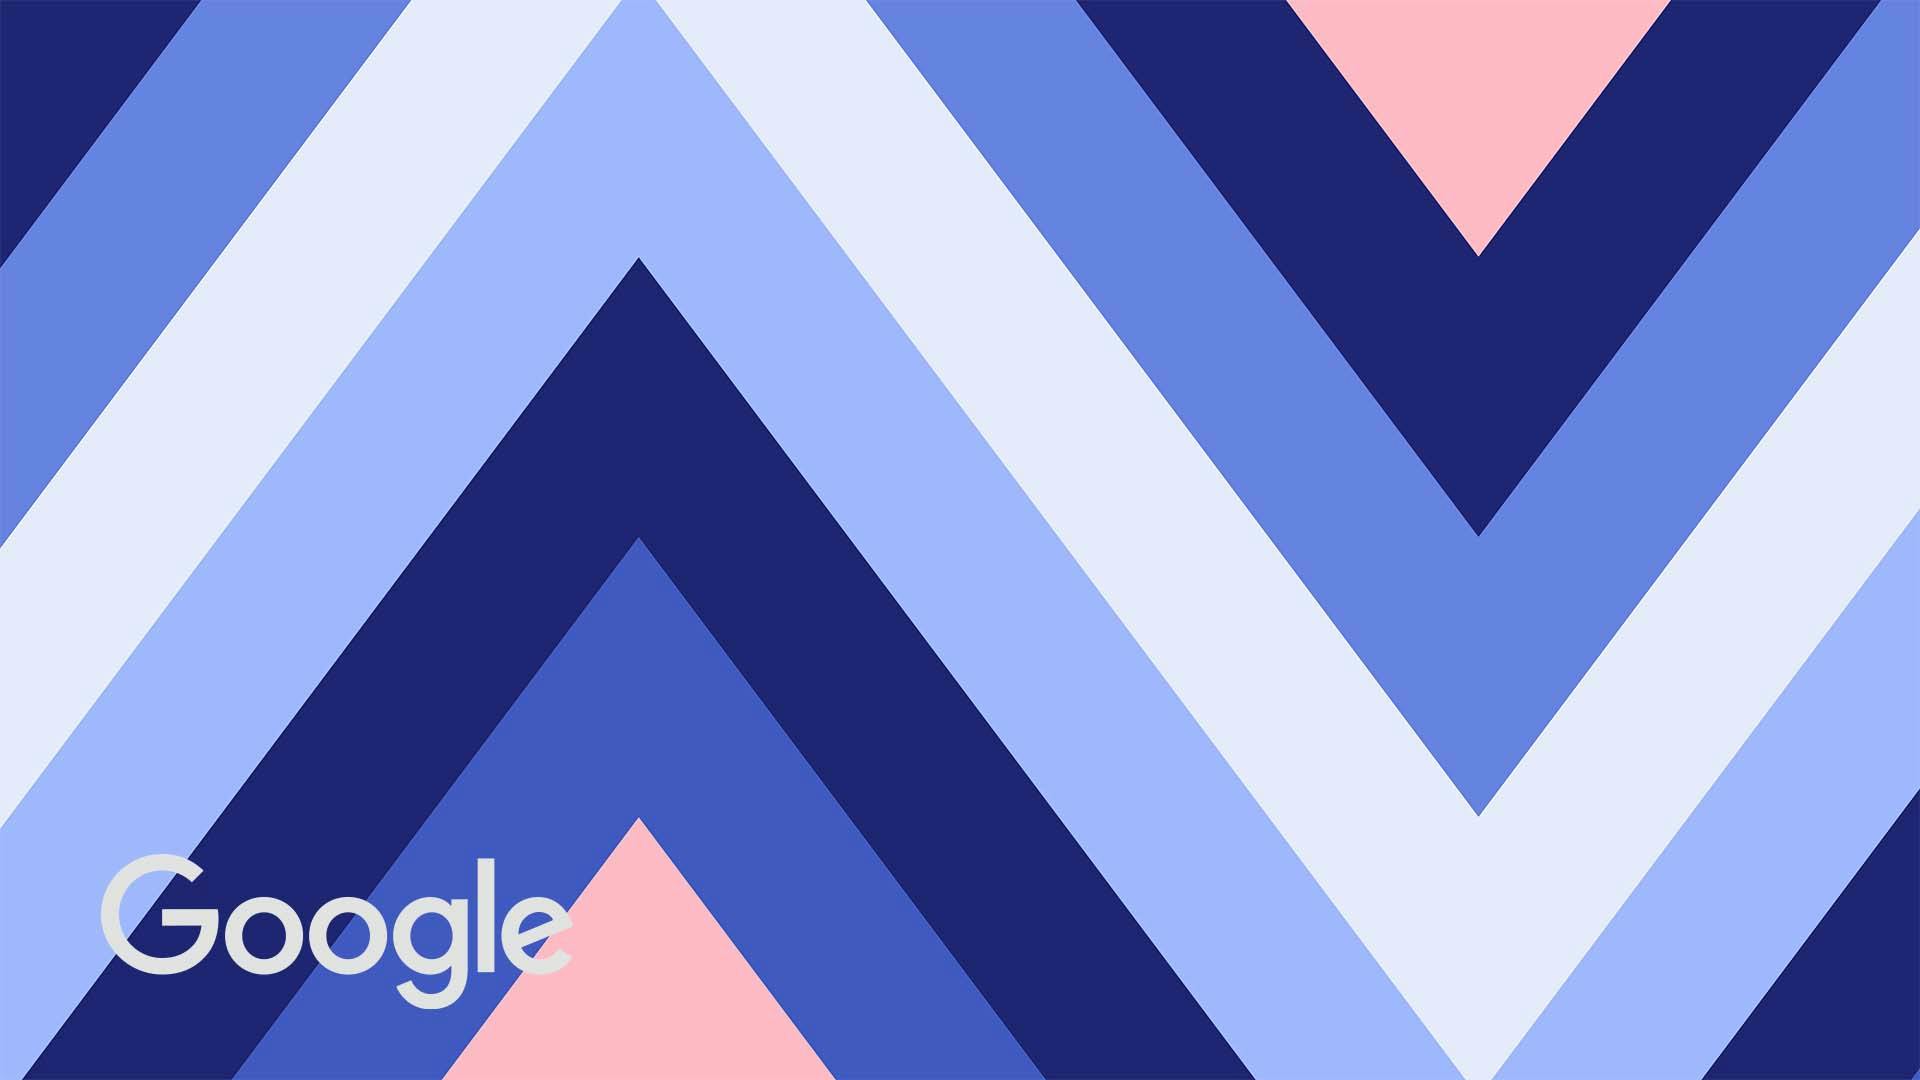 Zig-zag pattern with a pink, blue, and purple color palette.